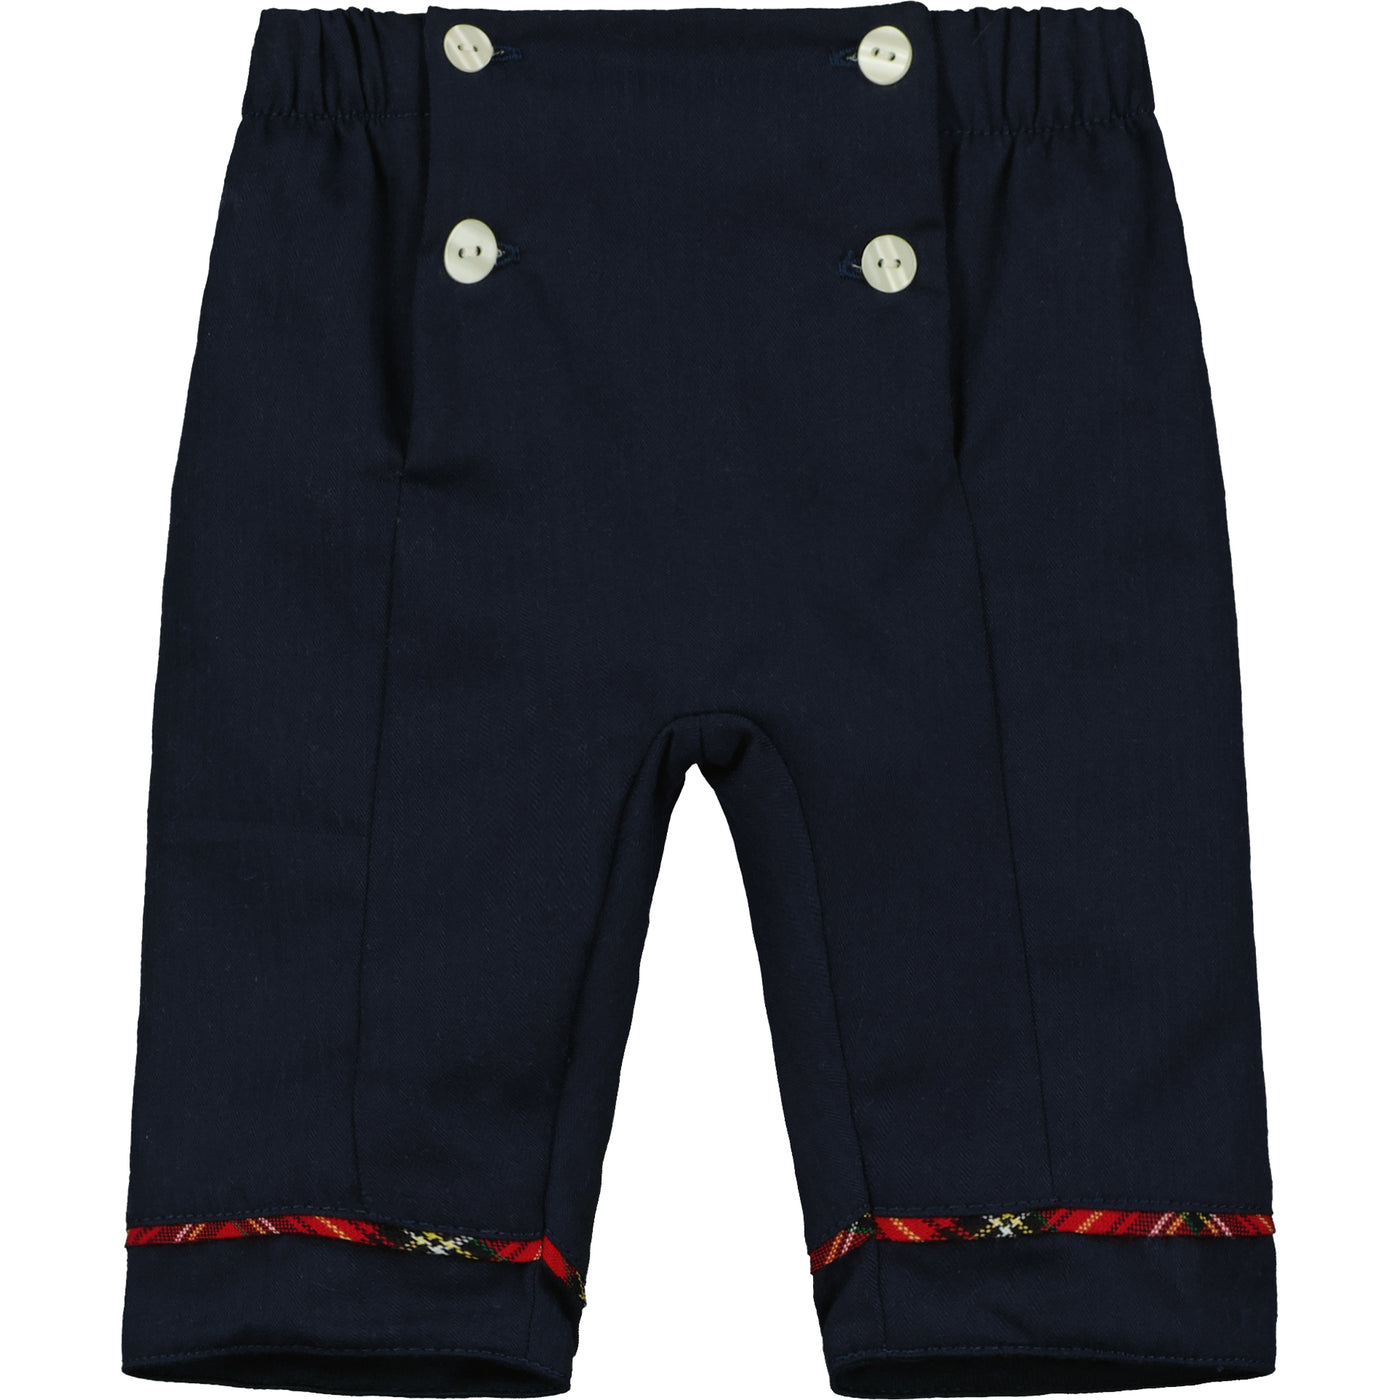 Ellis Navy Two Piece Outfit